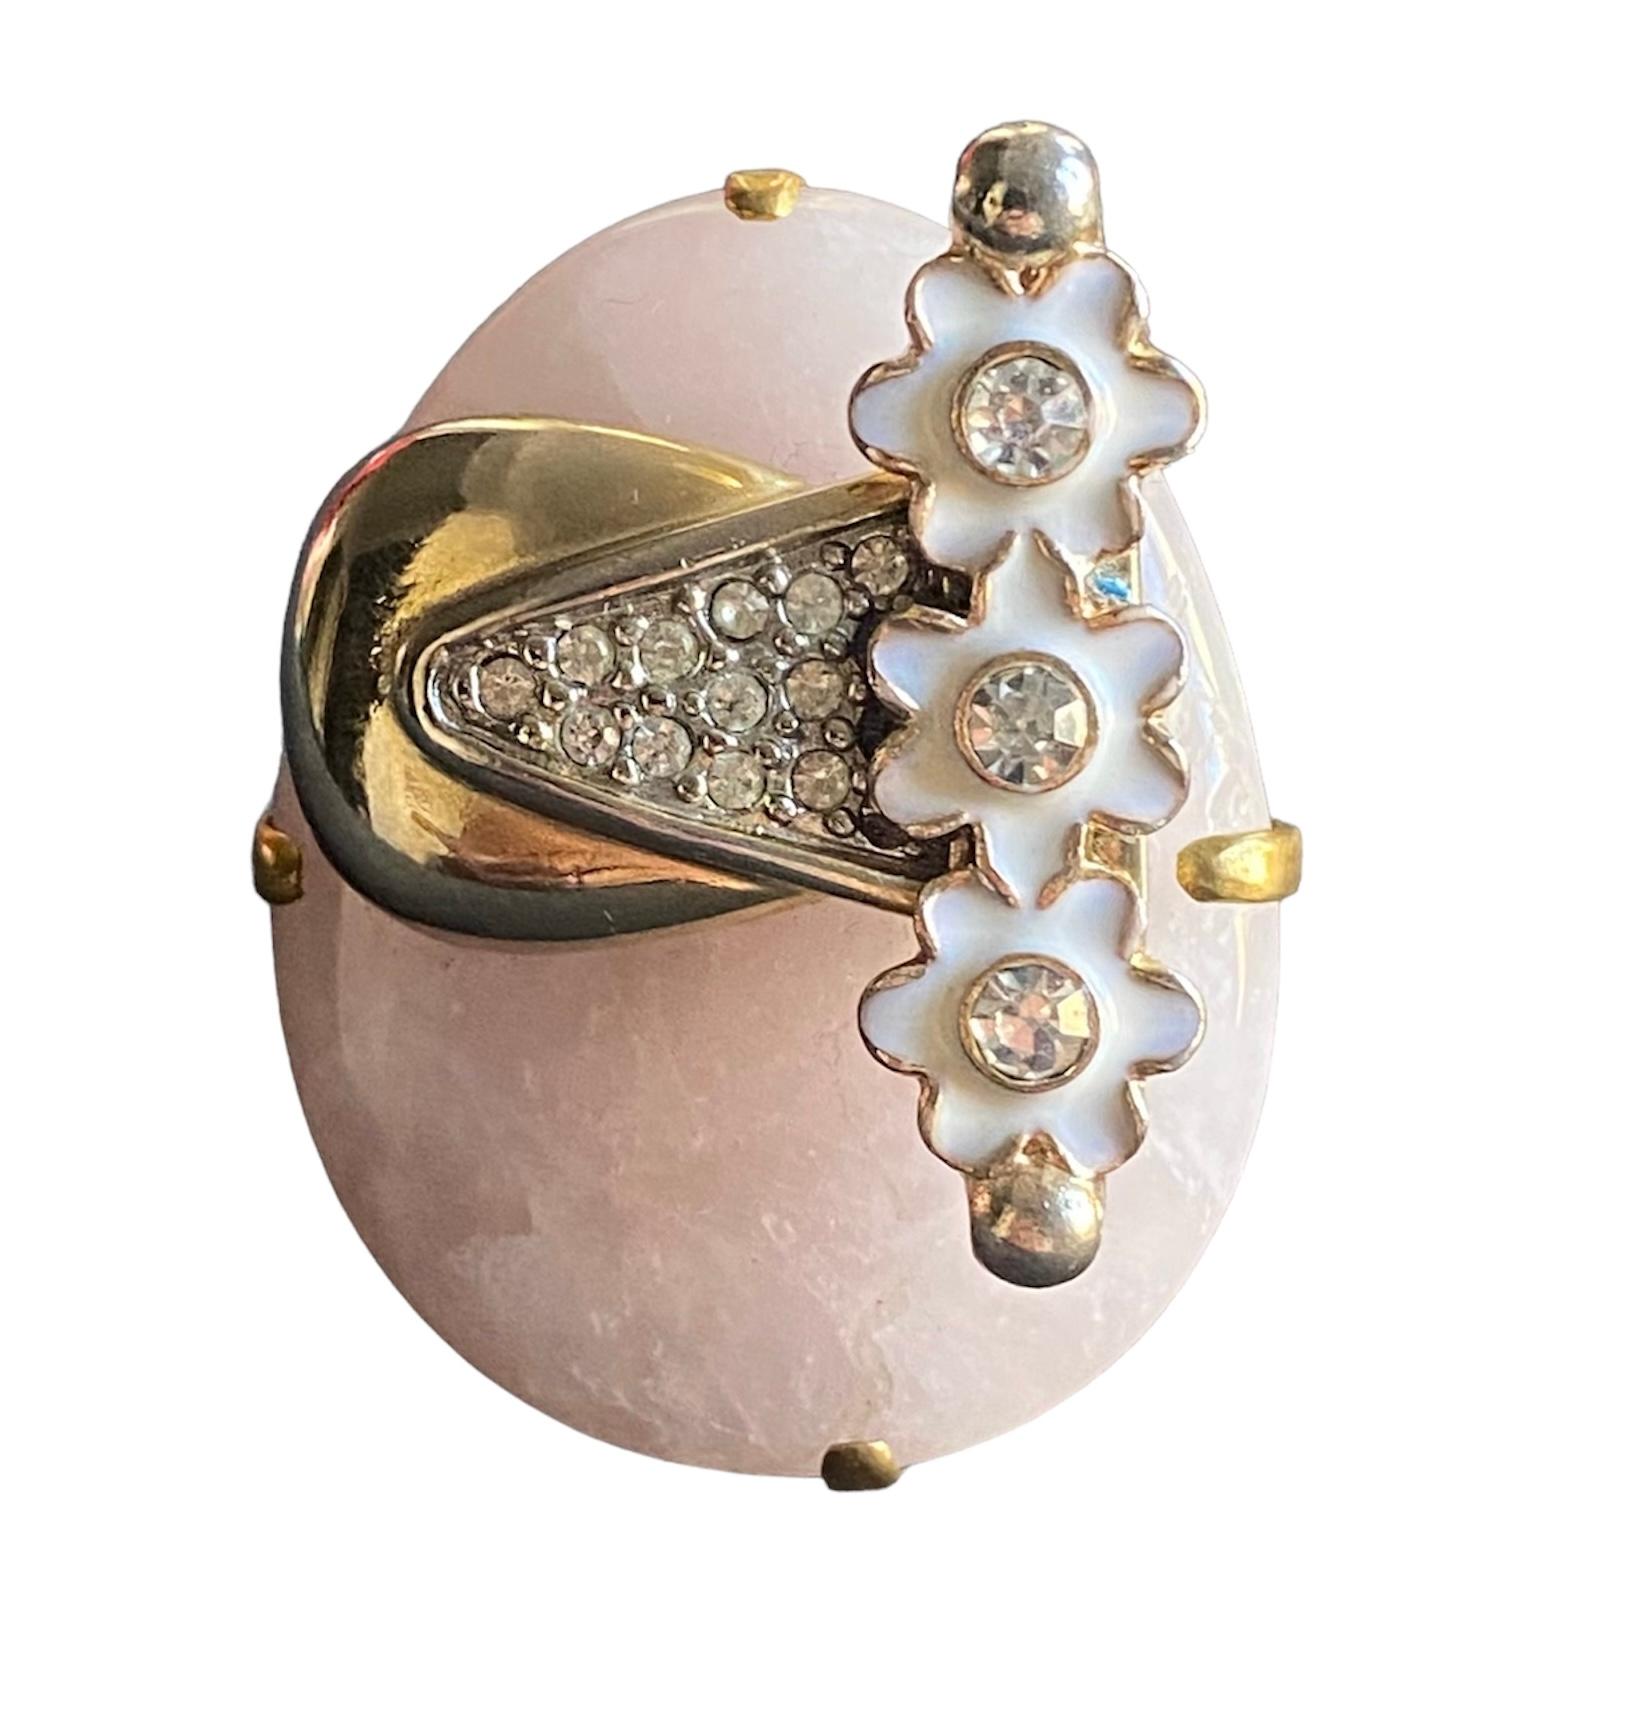 This is a unique piece created for Ludmila Navarro, fine artist & jewellery designer. A totally handmade jewel which it was created from a sustainable process during which she recovers and improves several antique and vintage jewels and elements